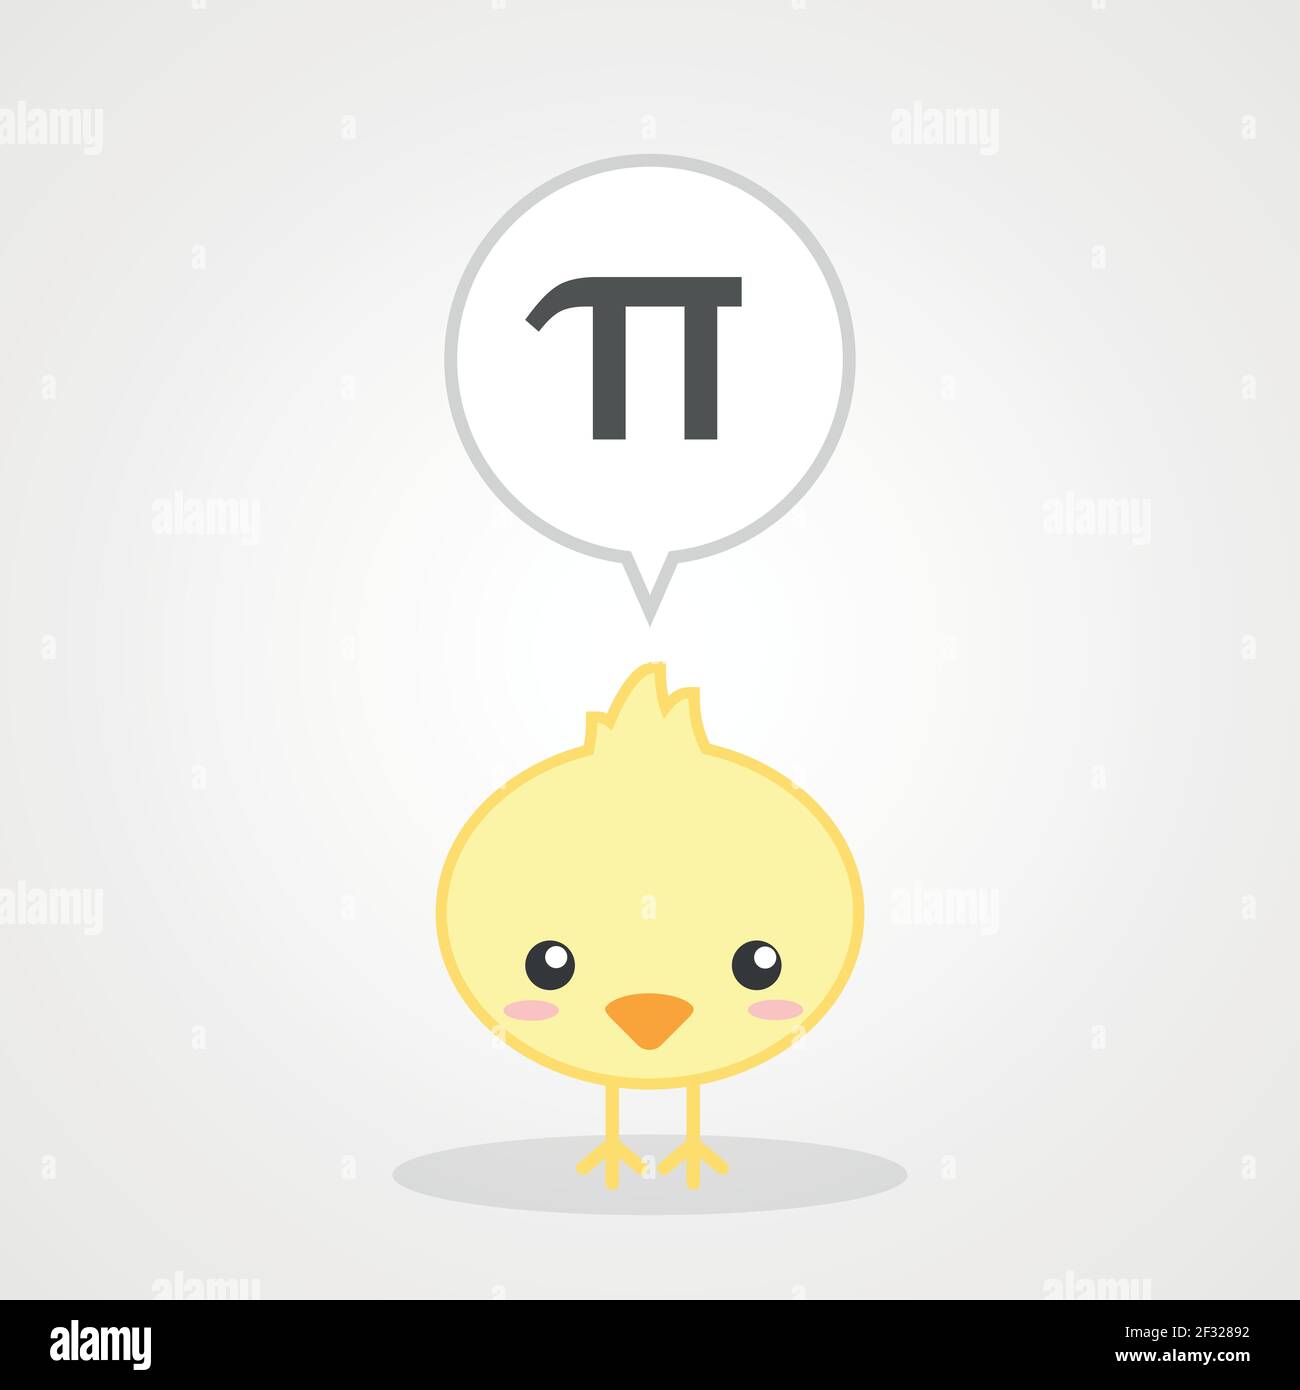 Chick and Number Pi. Pi day. March 14. Vector illustration, flat design Stock Vector